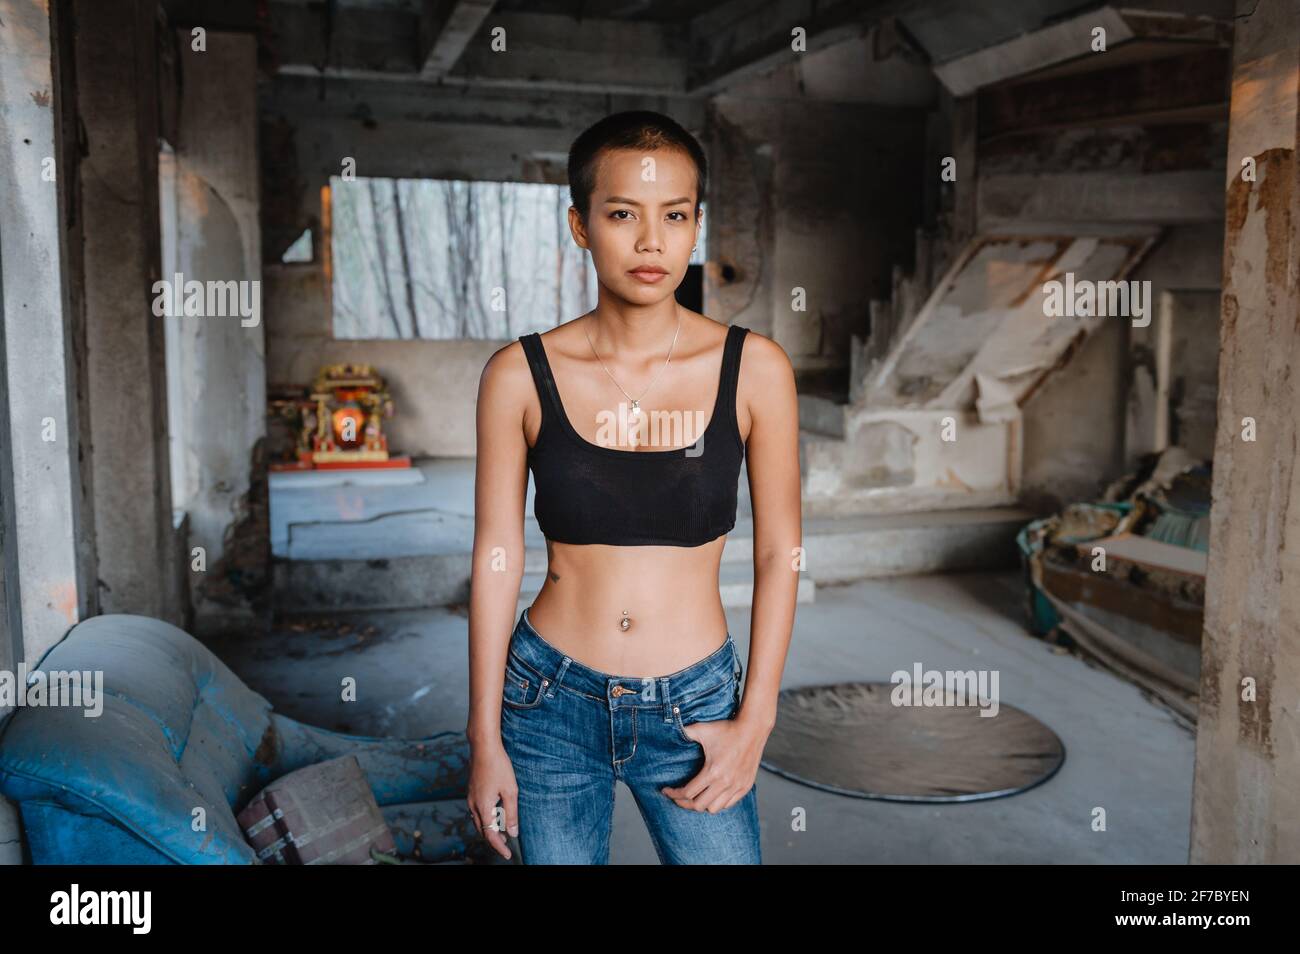 A young short hair Asian woman wearing a sports bra and blue jeans is standing in an abandoned house looking at the camera. Stock Photo